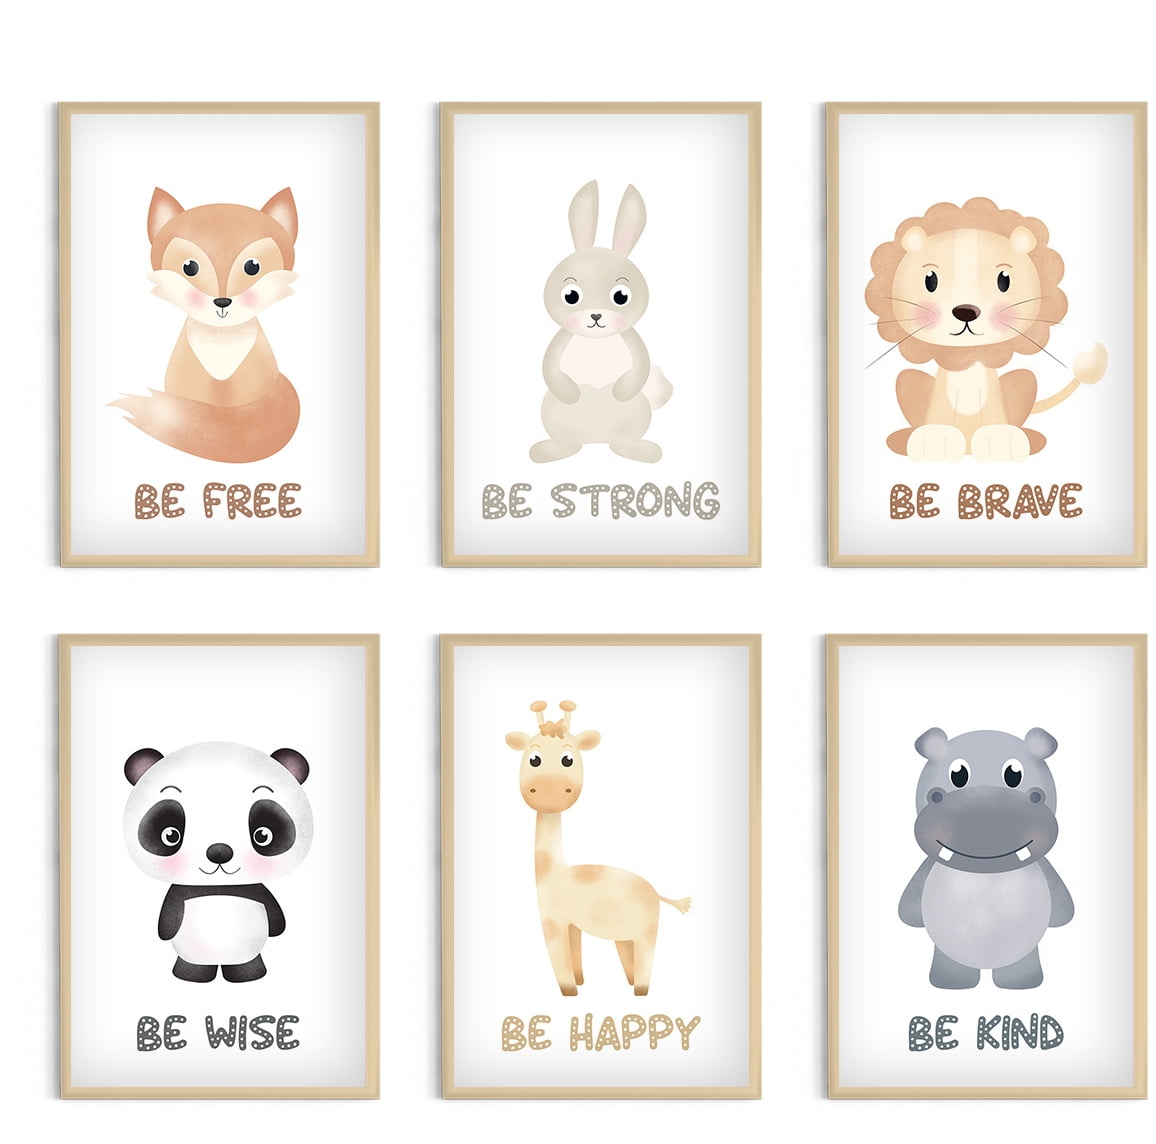 Details about   Woodland Animal Canvas Child Poster Nursery Quotes Wall Art Print Bedroom Decor 